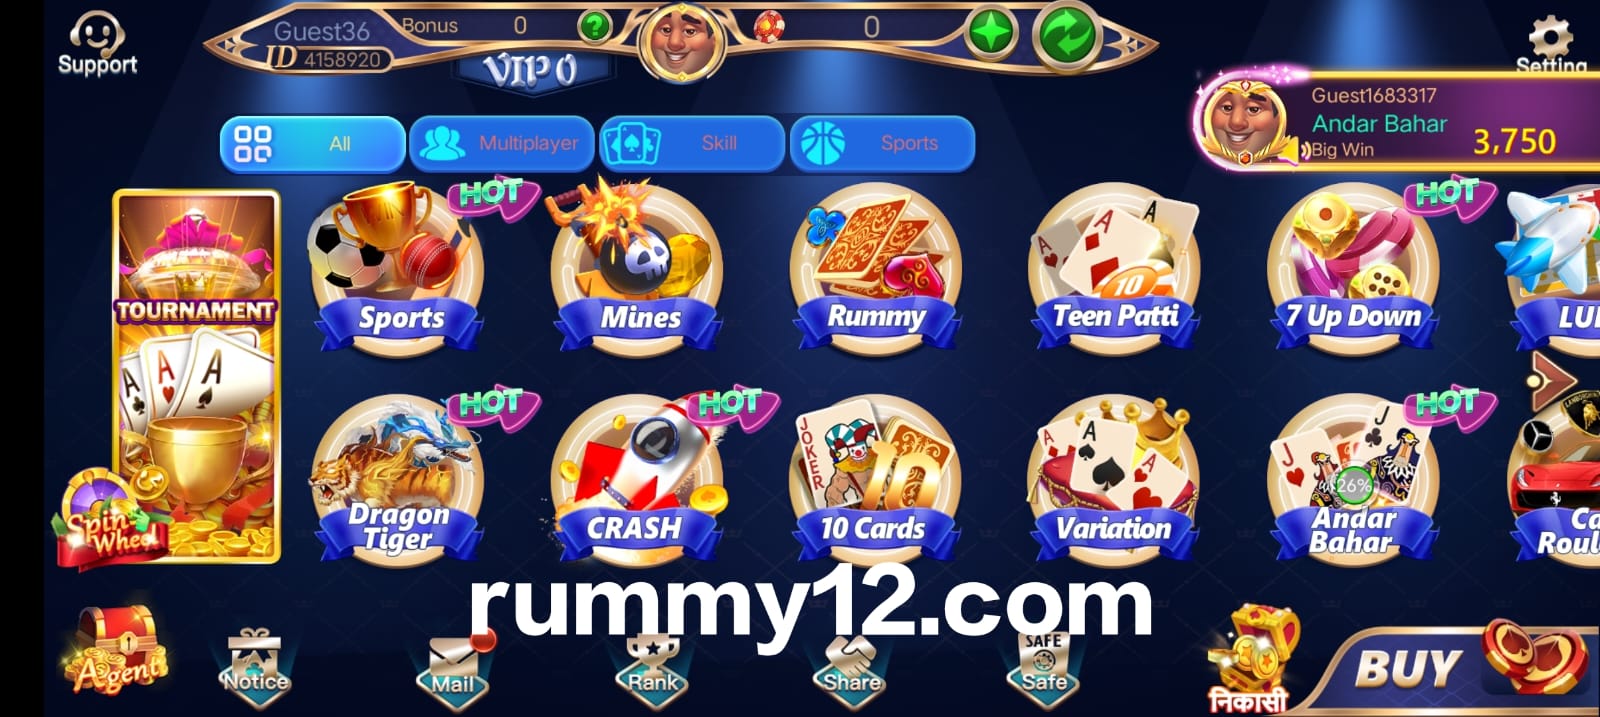 List Of Available 3 Patti Sea Apk Real Cash Games